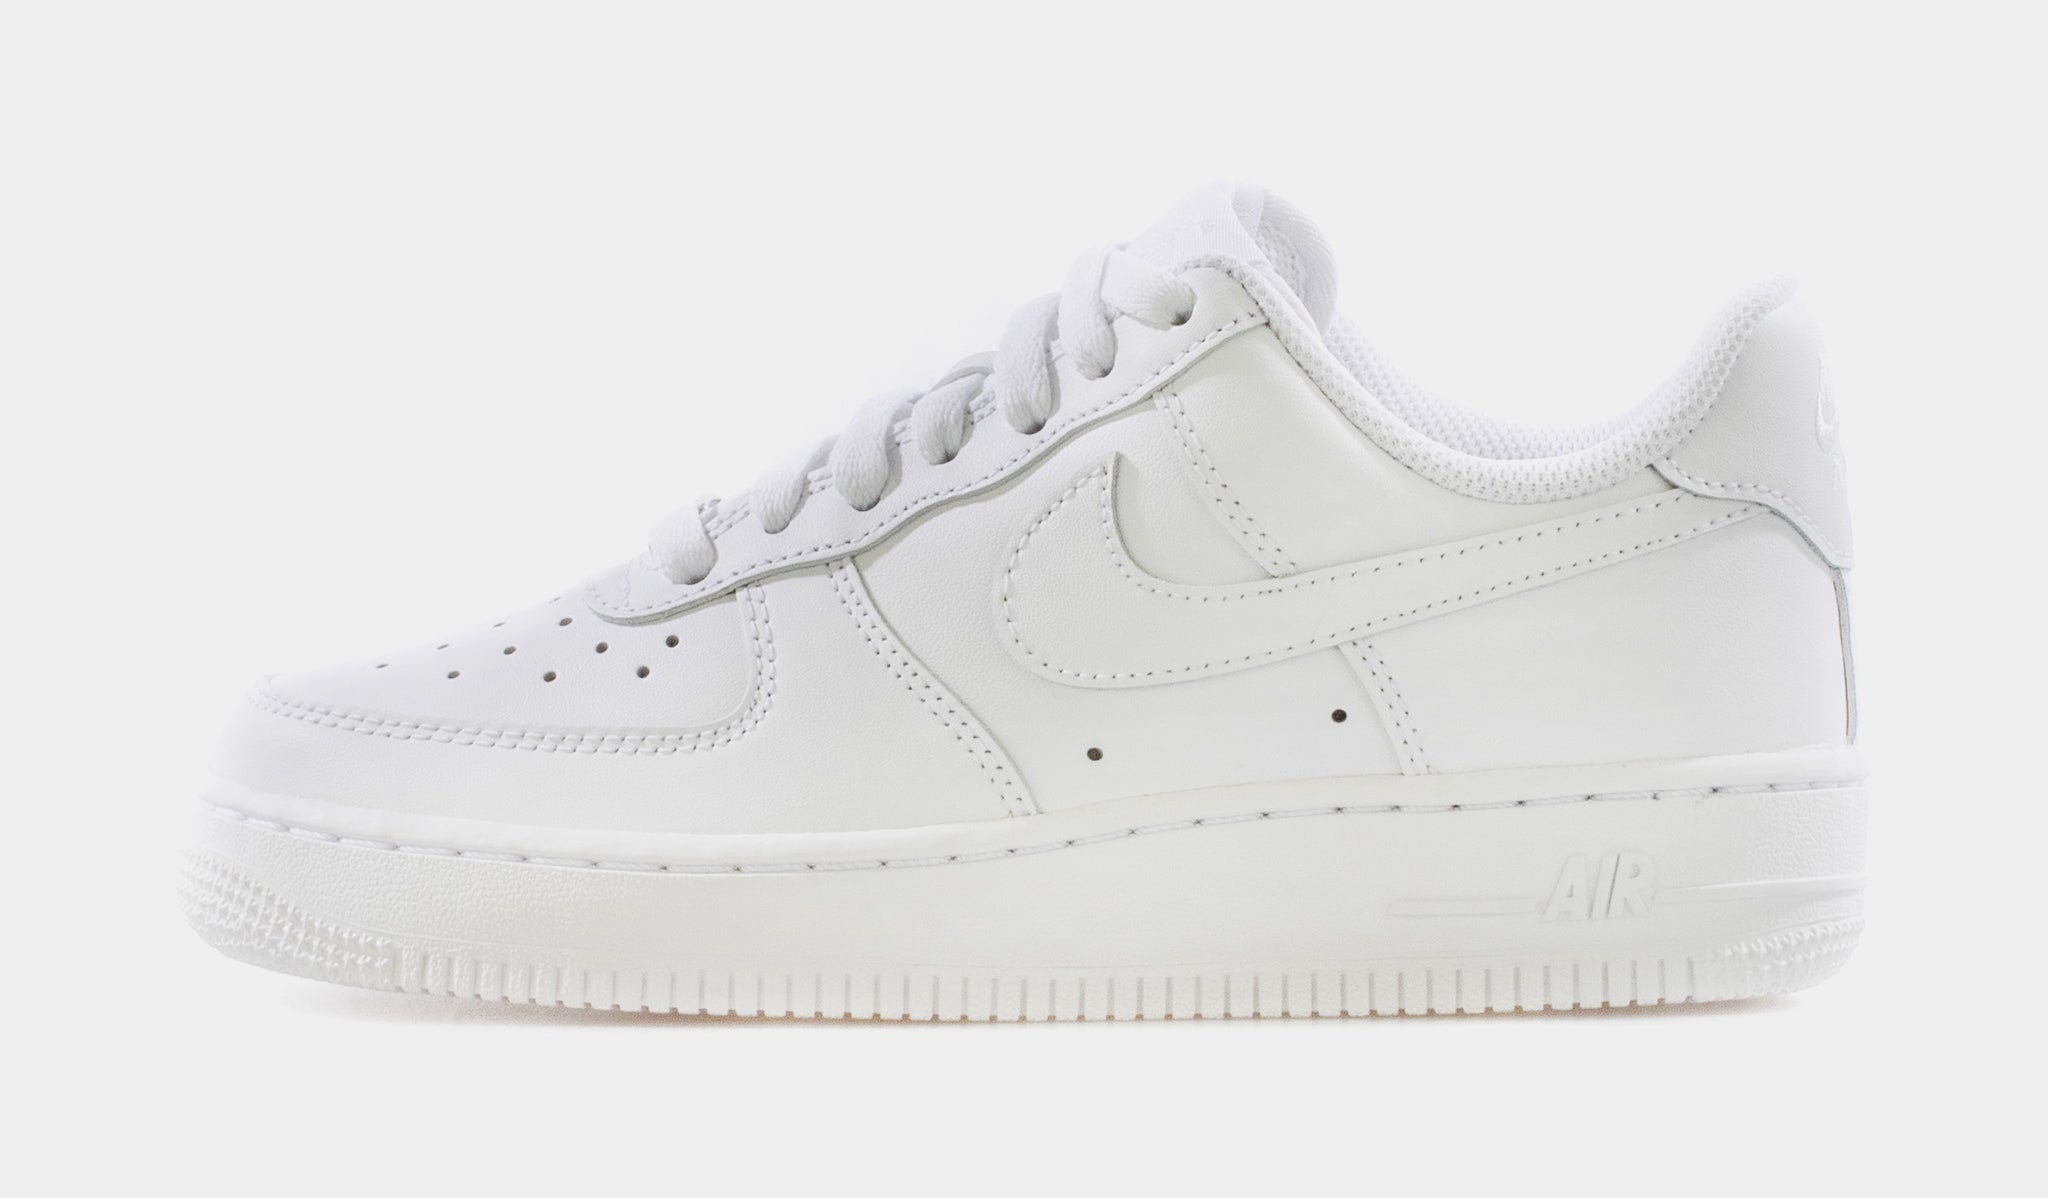 Nike Air Force 1 '07 DD8959-100 Women's White Leather Shoes Size